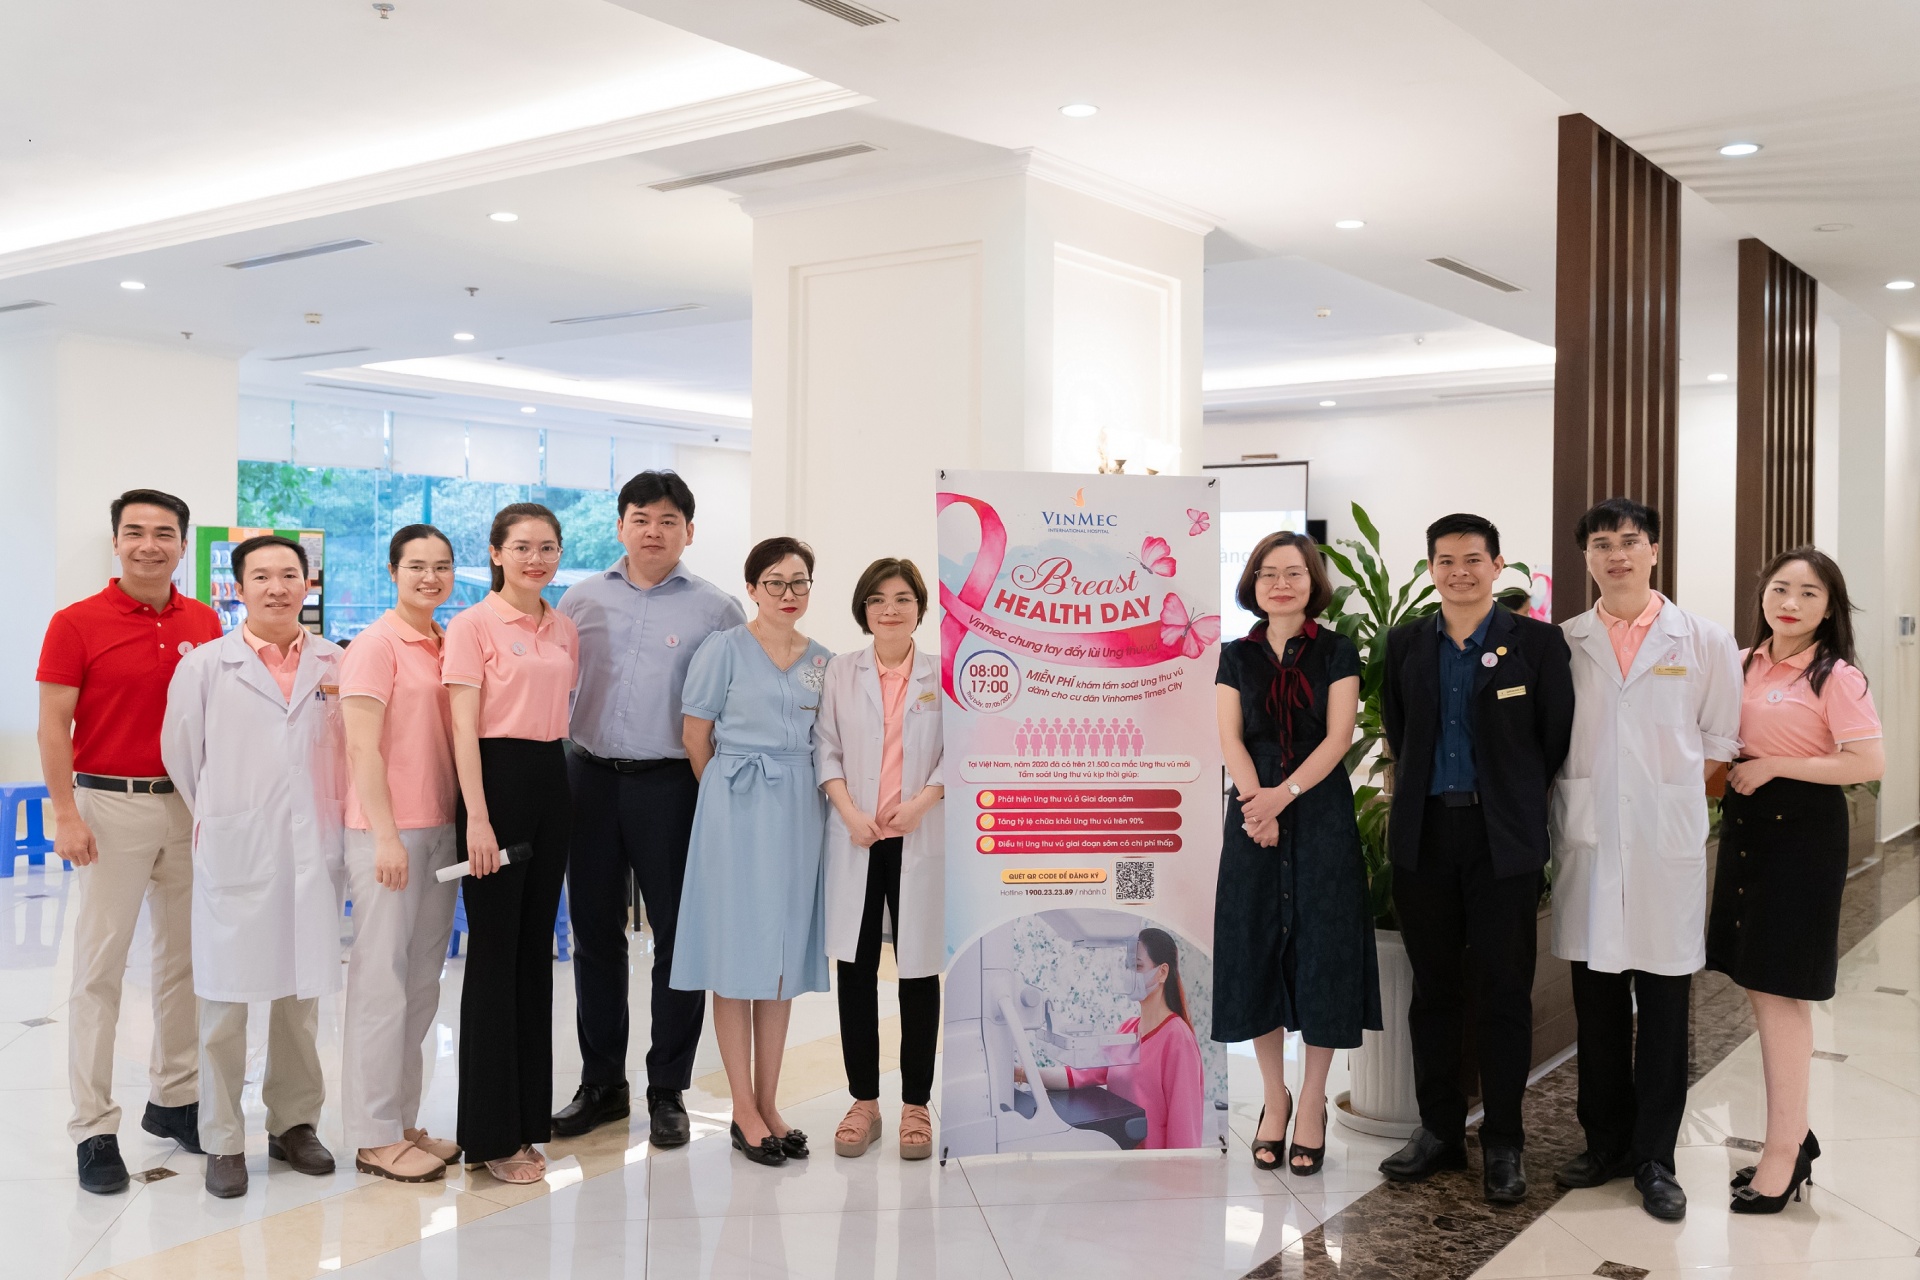 Healthcare trio collaborates to provide thousands of free breast scans